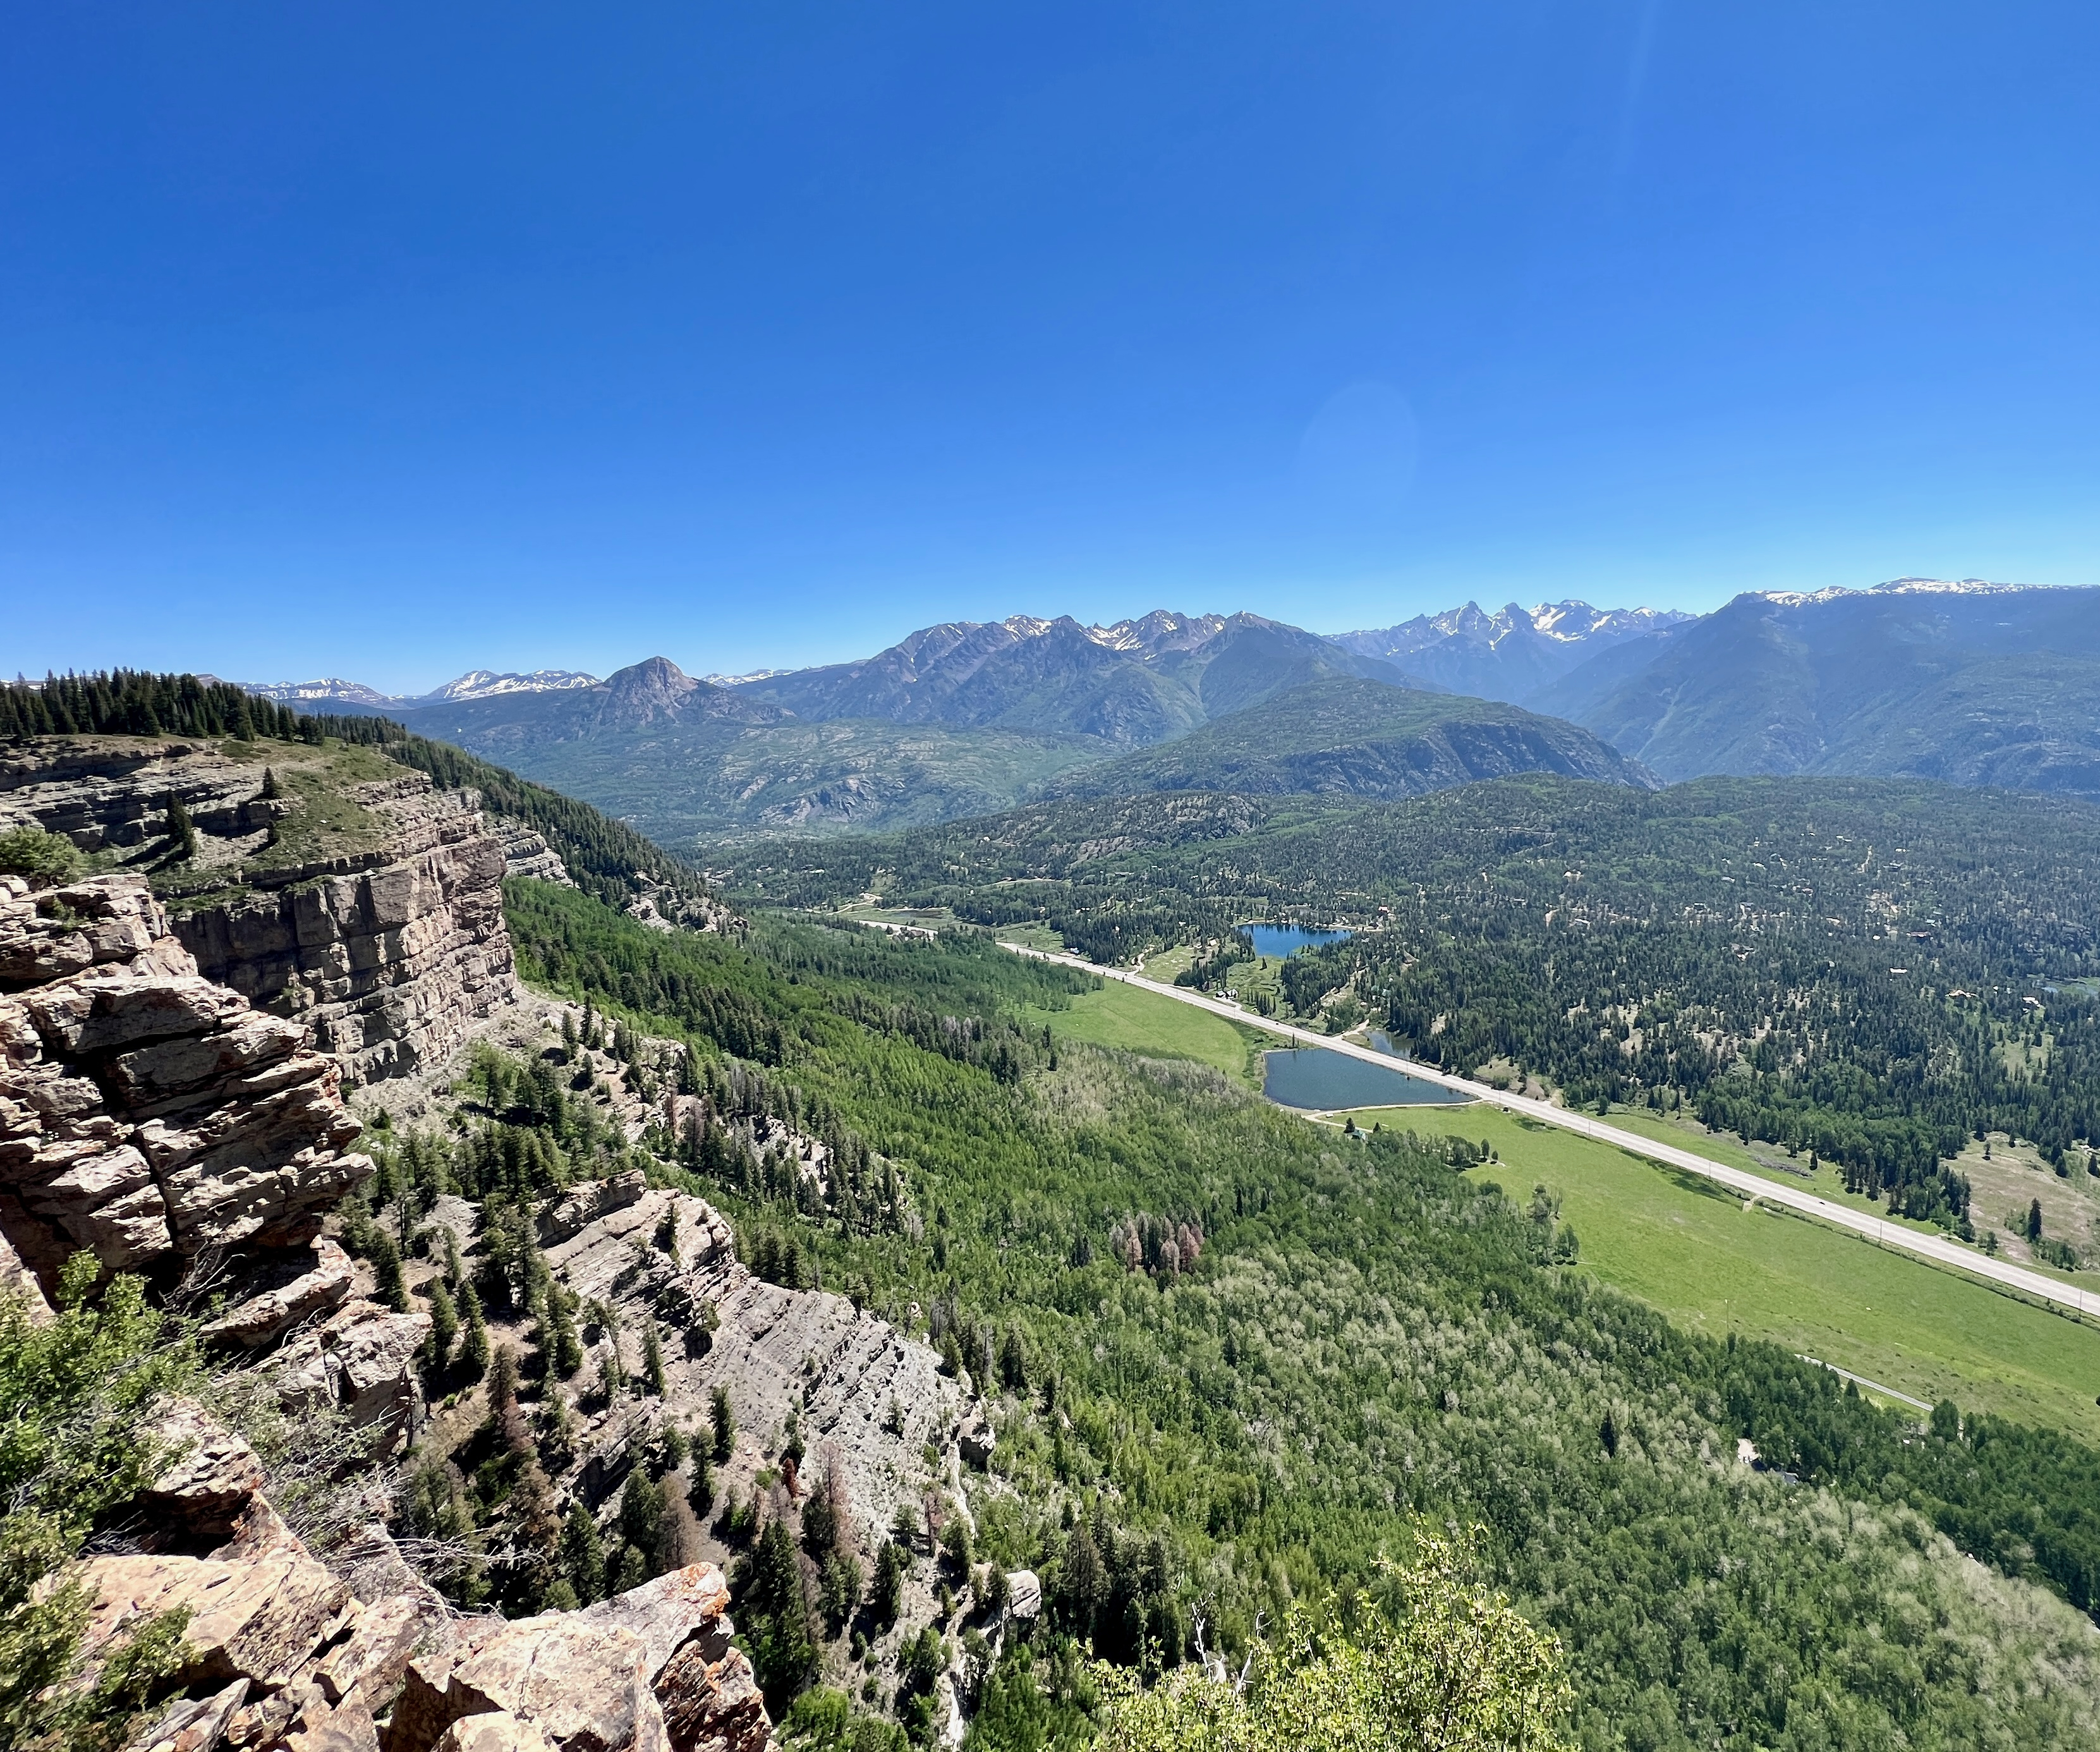 View from the top of Castle Rock. Photo: Greg Heil